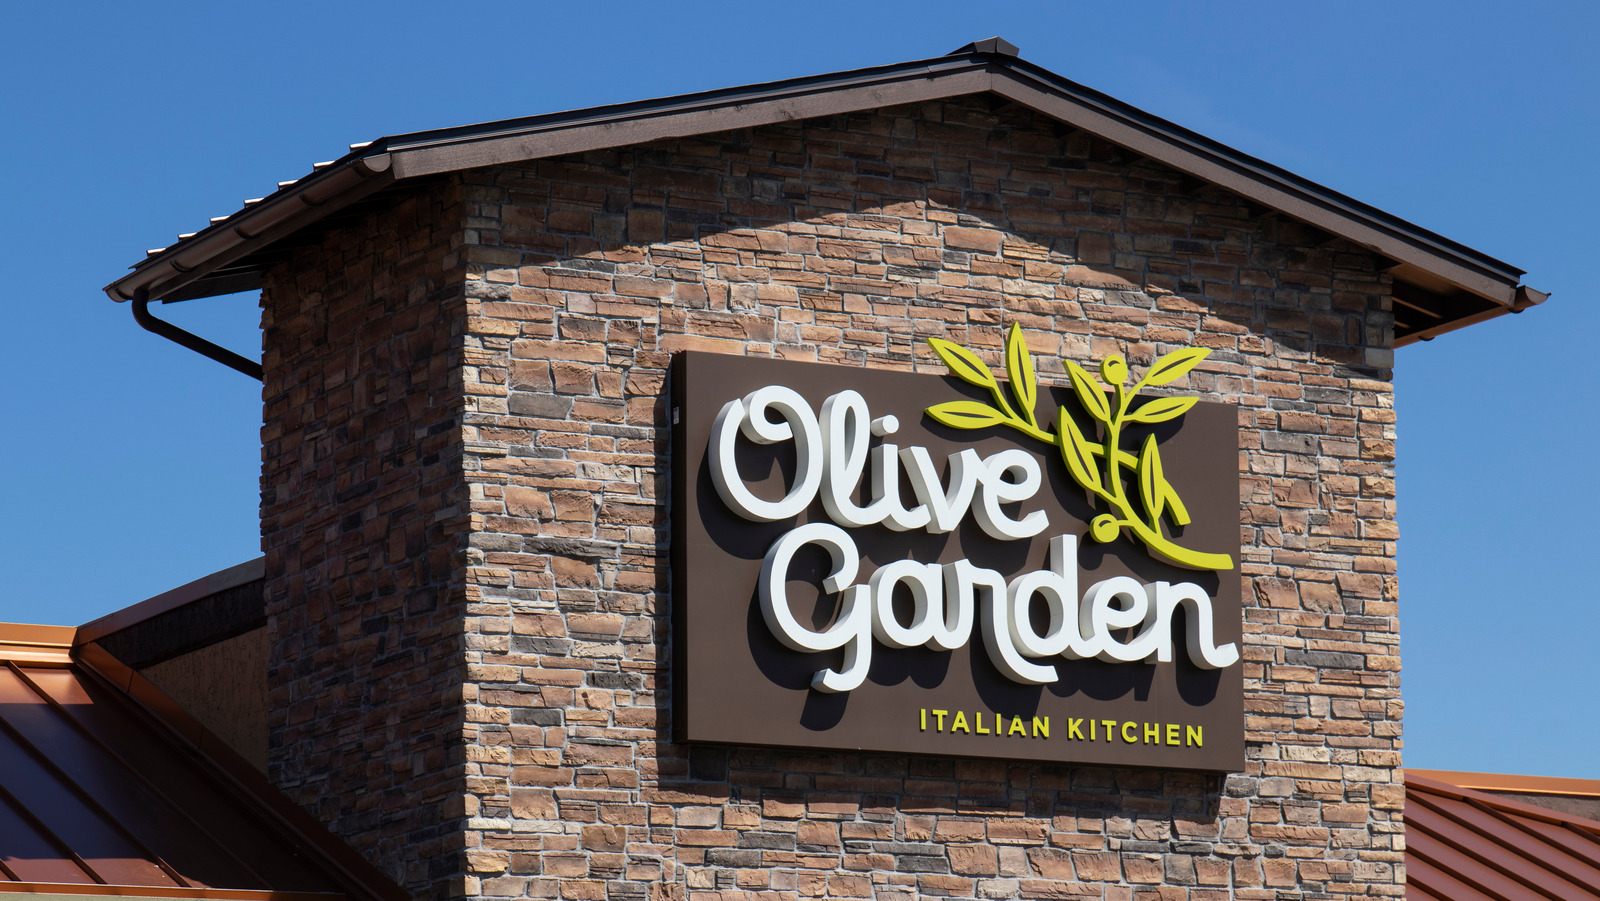 https://www.mashed.com/img/gallery/workers-reveal-what-its-really-like-to-work-at-olive-garden/l-intro-1630071563.jpg